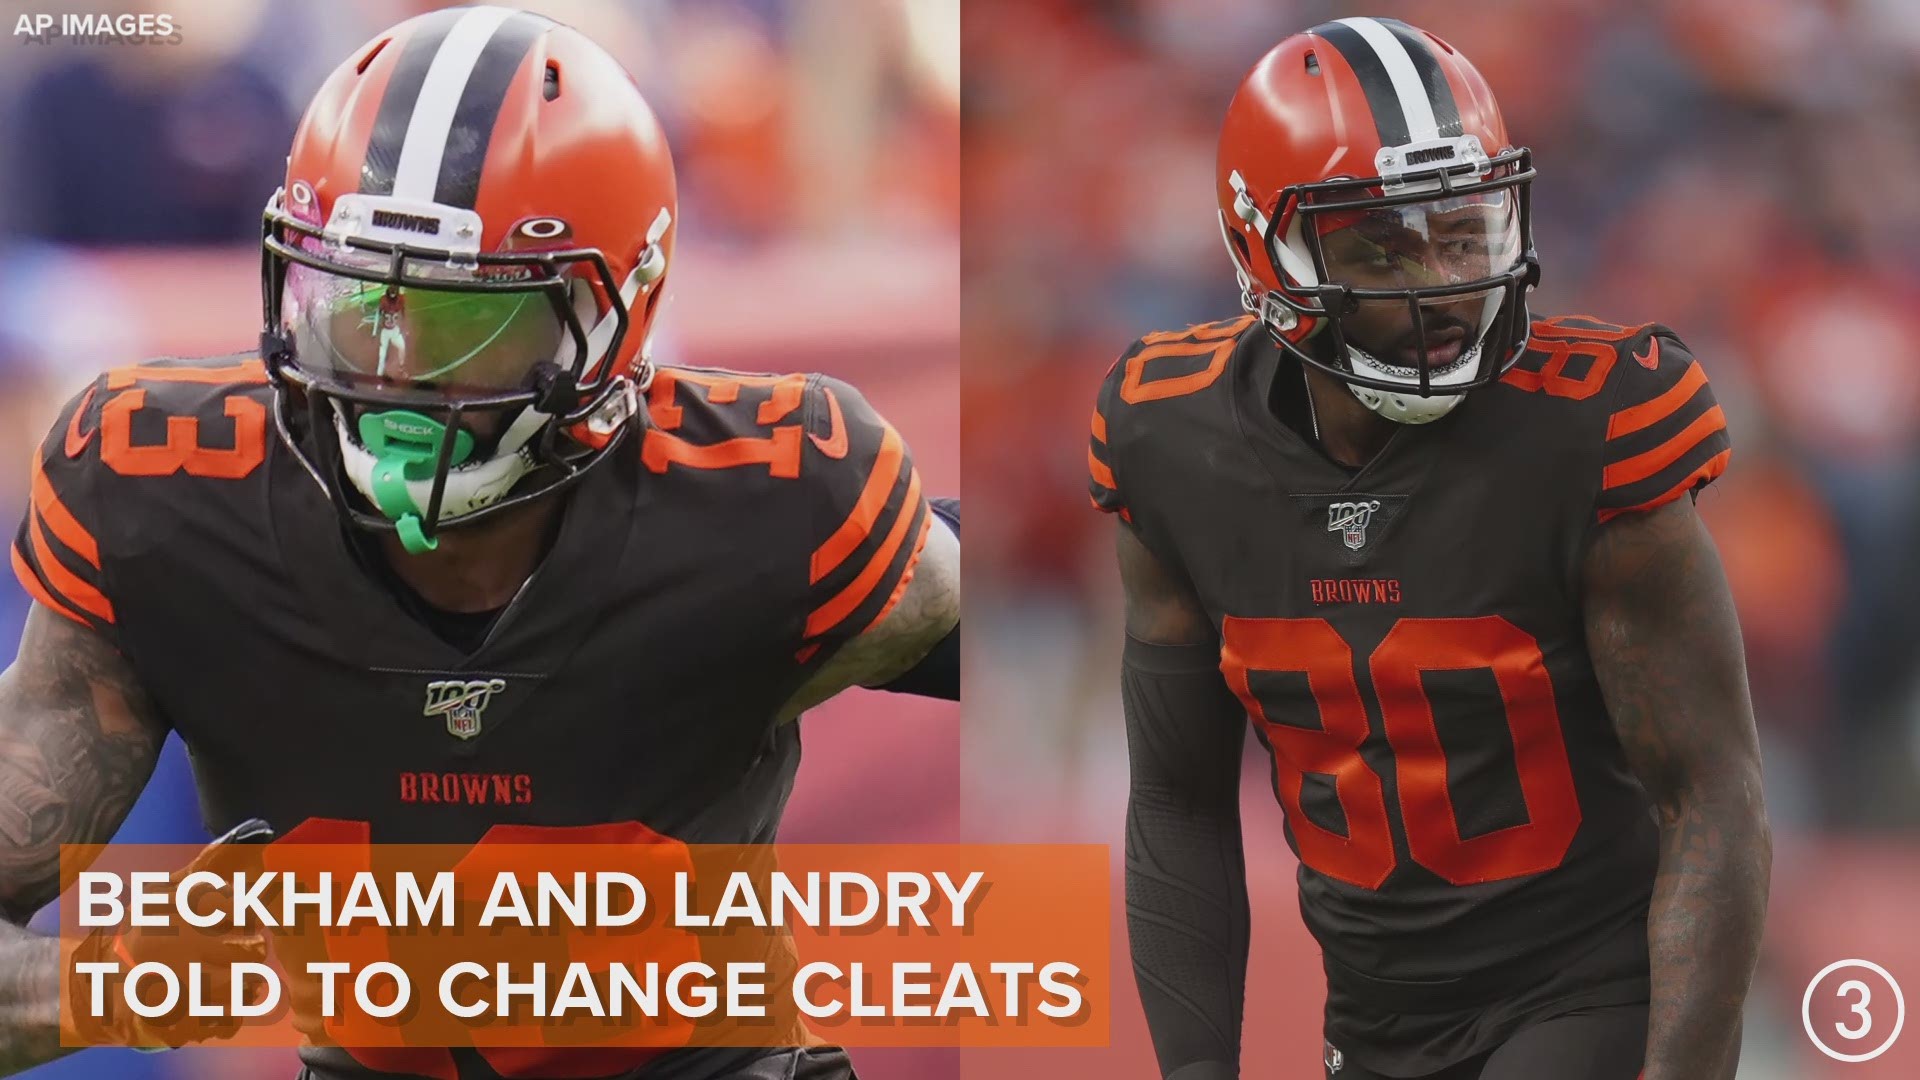 Cleat-gate! According to CBS Sports', Cleveland Browns receivers Odell Beckham Jr. and Jarvis Landry were told to change their cleats or be sidelined vs. the Broncos